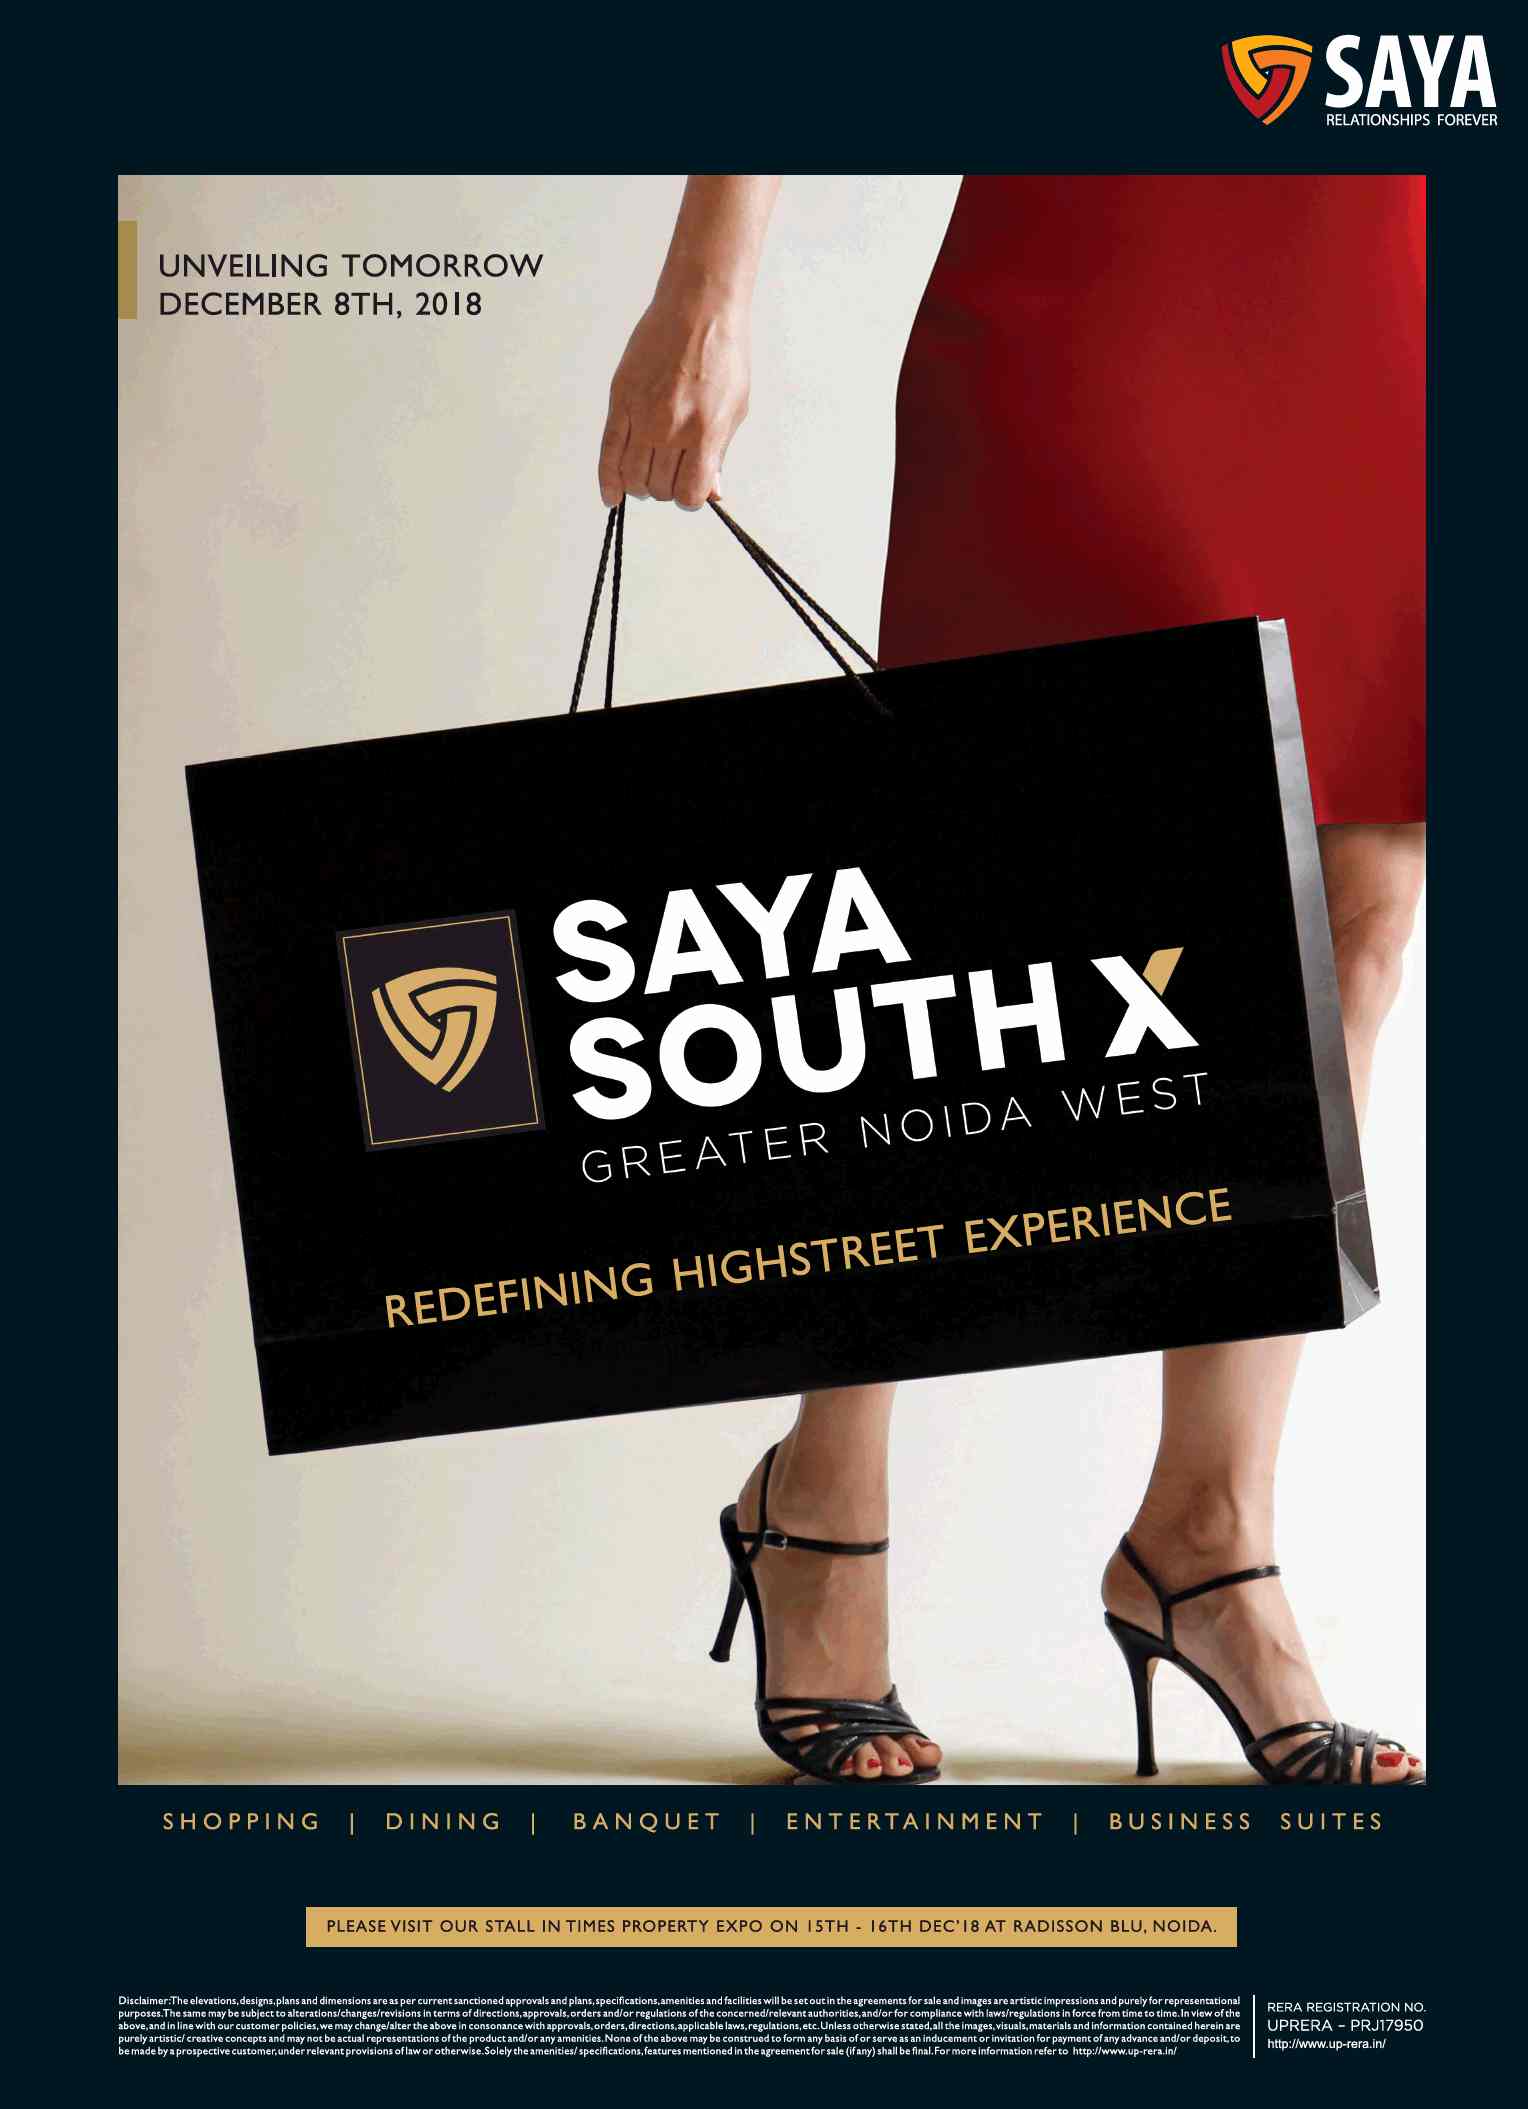 Redifine highstreet experience at Saya South X Mall in Greater Noida Update